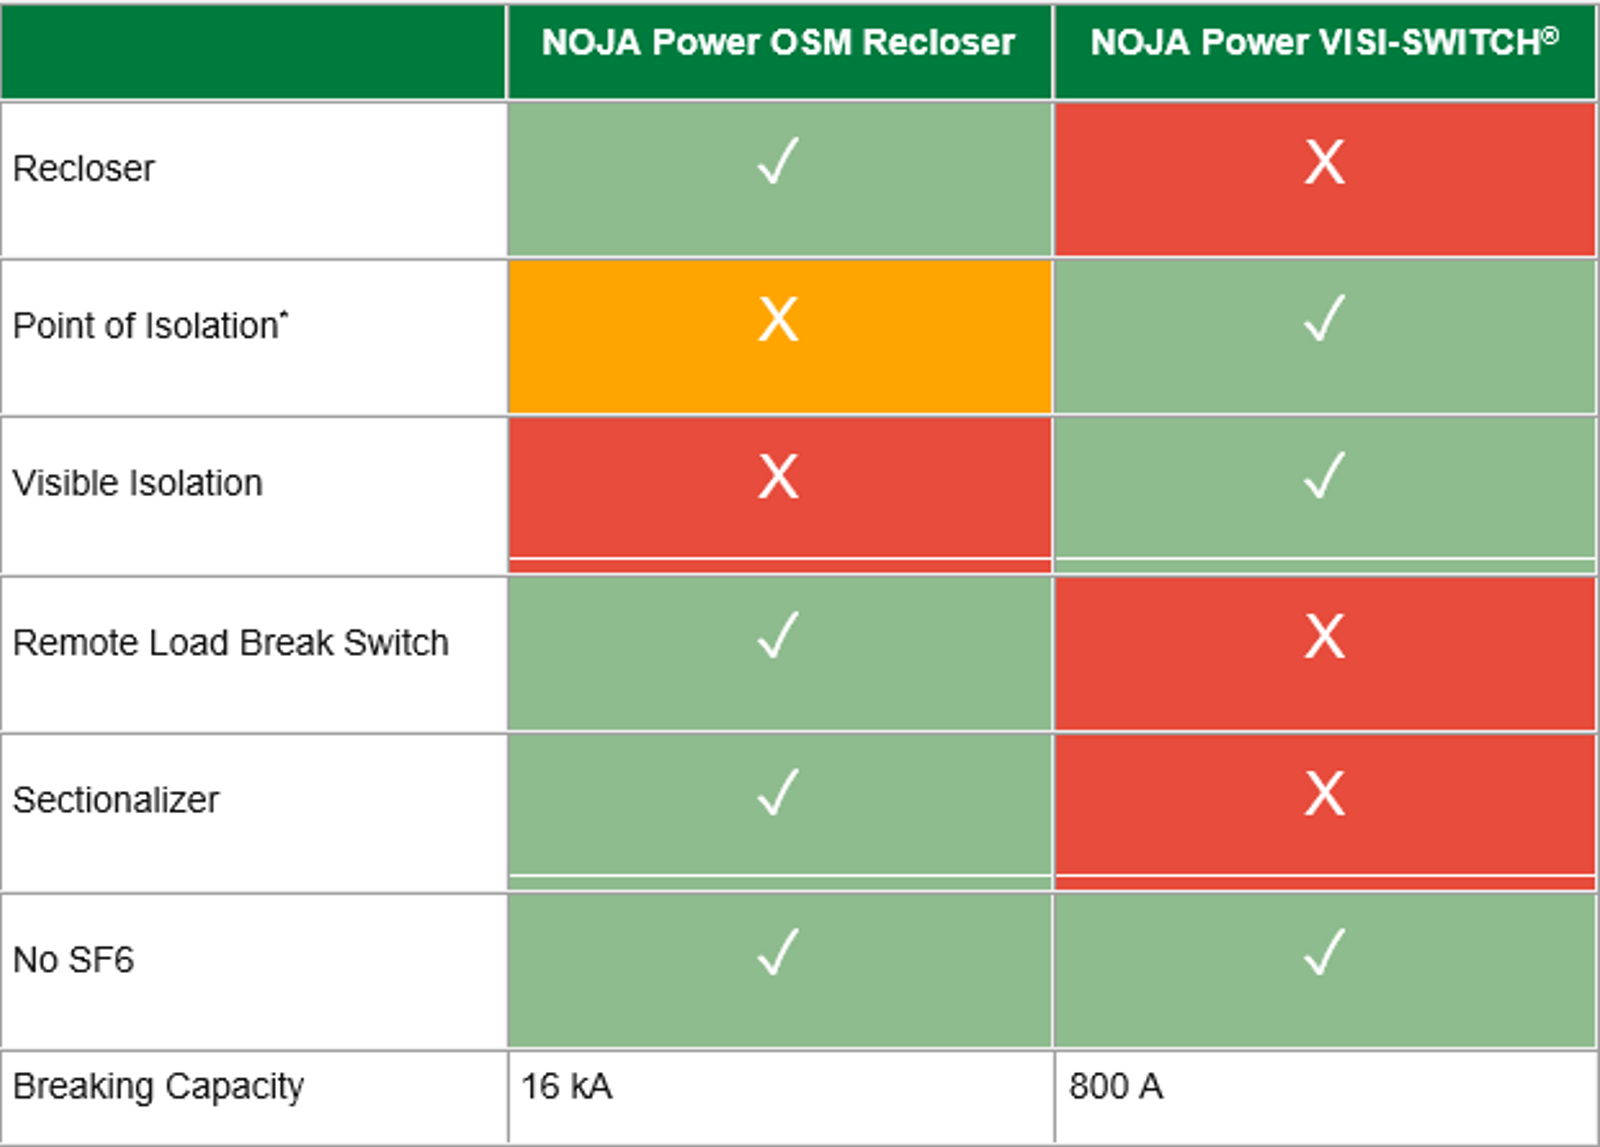 Table showing comparison between OSM Recloser and Visi-Switch